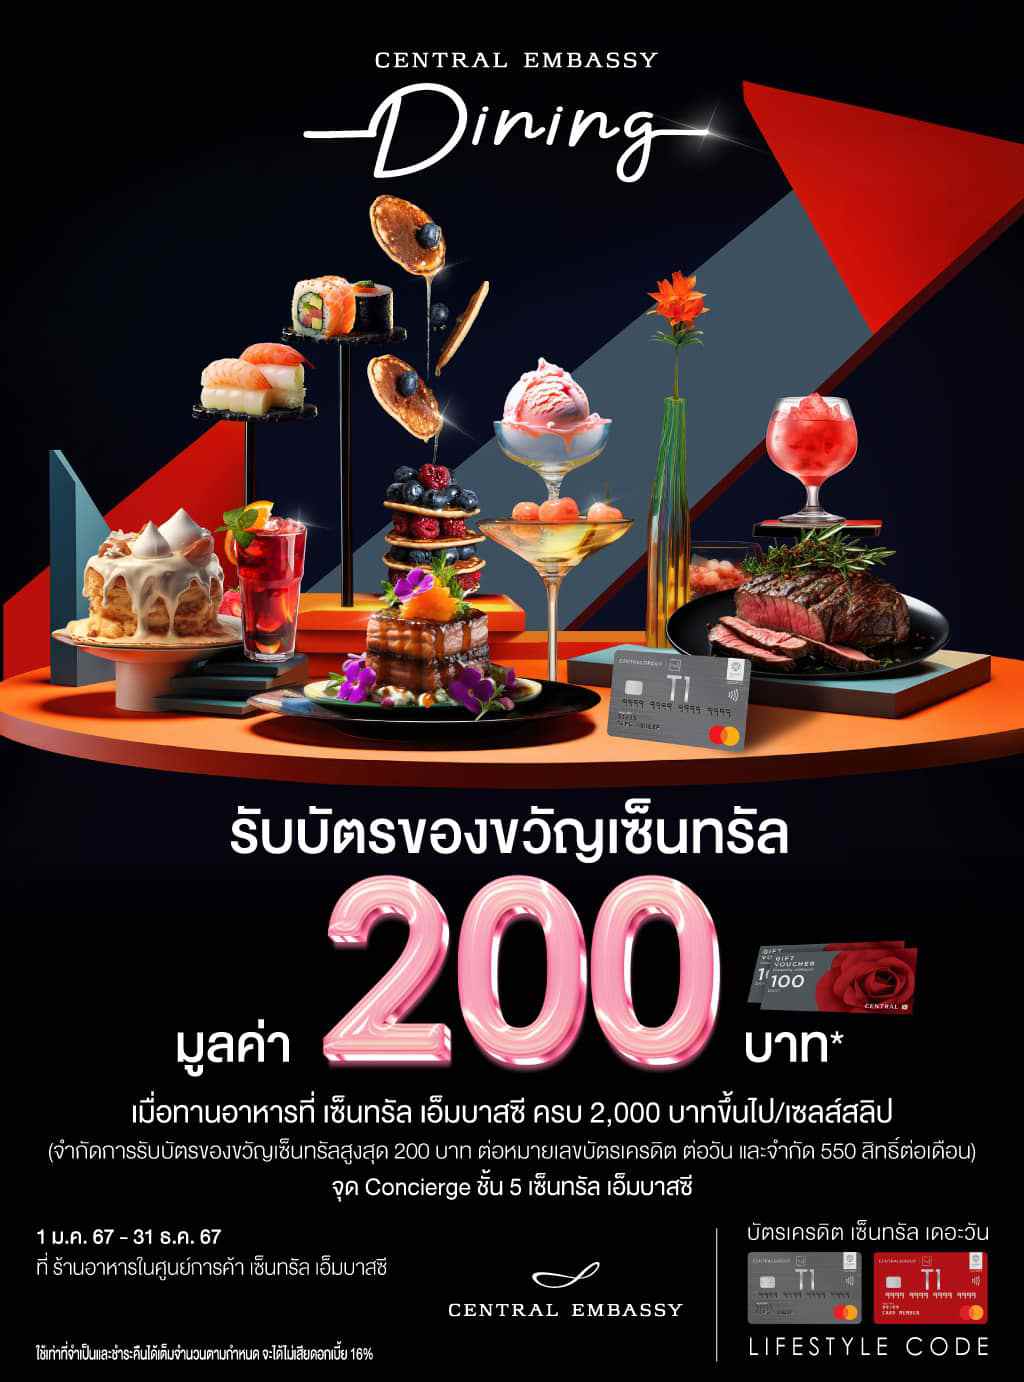 https://www.centralthe1card.com/th/promotion/dining/dining-central-embassy-202312.html